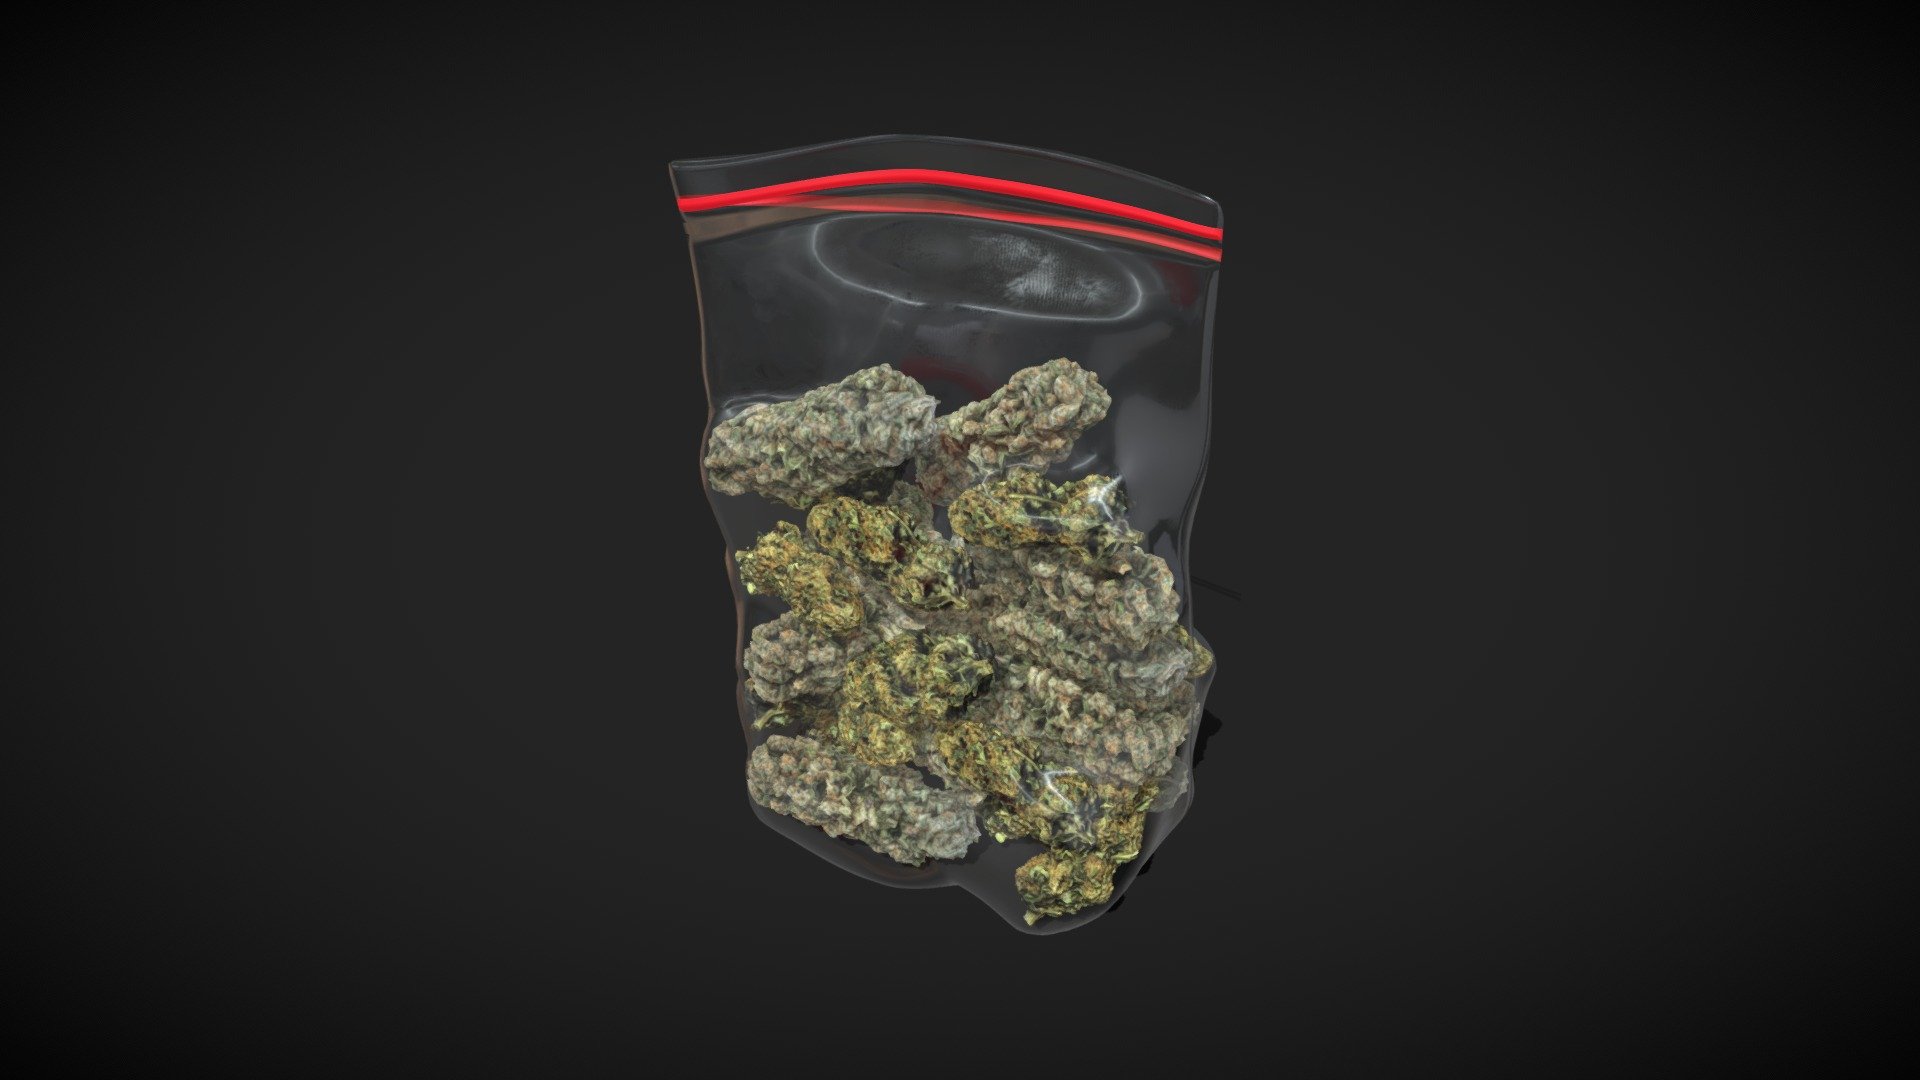 Cannabis Weed Bag 3 made in blender. 
This model comes in variety of file format! Alembic, FBX, OBJ, Blend, Gltf &amp; Stl!
All the Blender files are available in the archive.

Verts: 617834 Tris: 857220

All my models are made with love for you to enjoy! Cheers! - Cannabis Weed Bag 3 - Buy Royalty Free 3D model by DGNS (@GuillaumeDGNS) 3d model